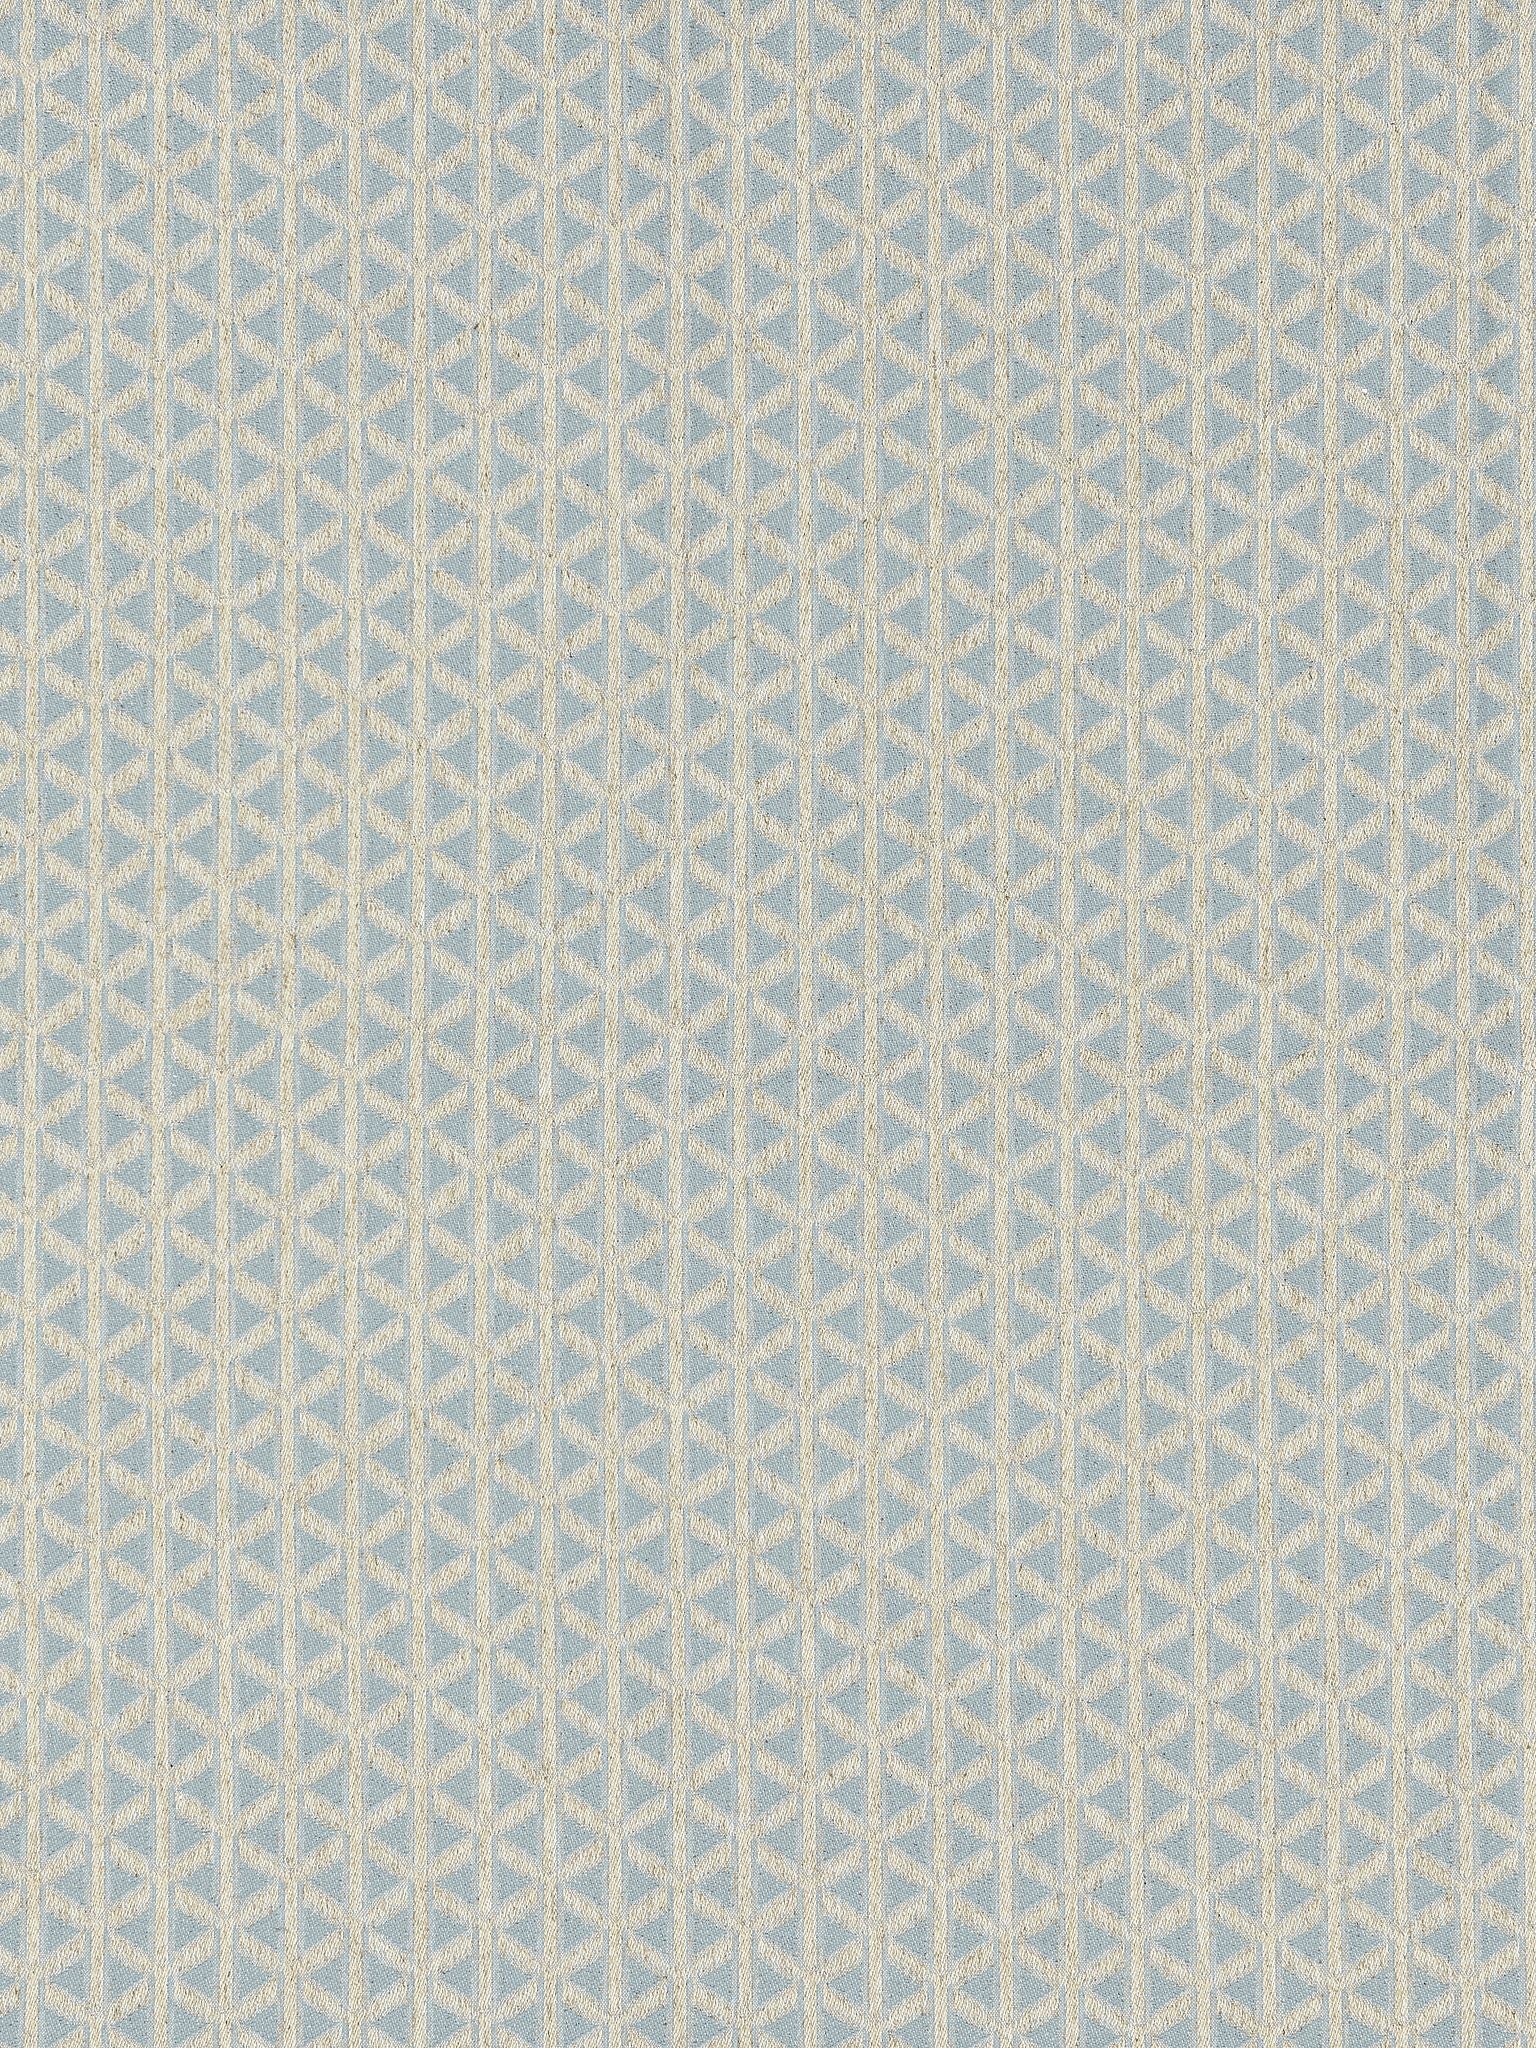 Cross Channel fabric in sky color - pattern number NK 0002CROS - by Scalamandre in the Old World Weavers collection